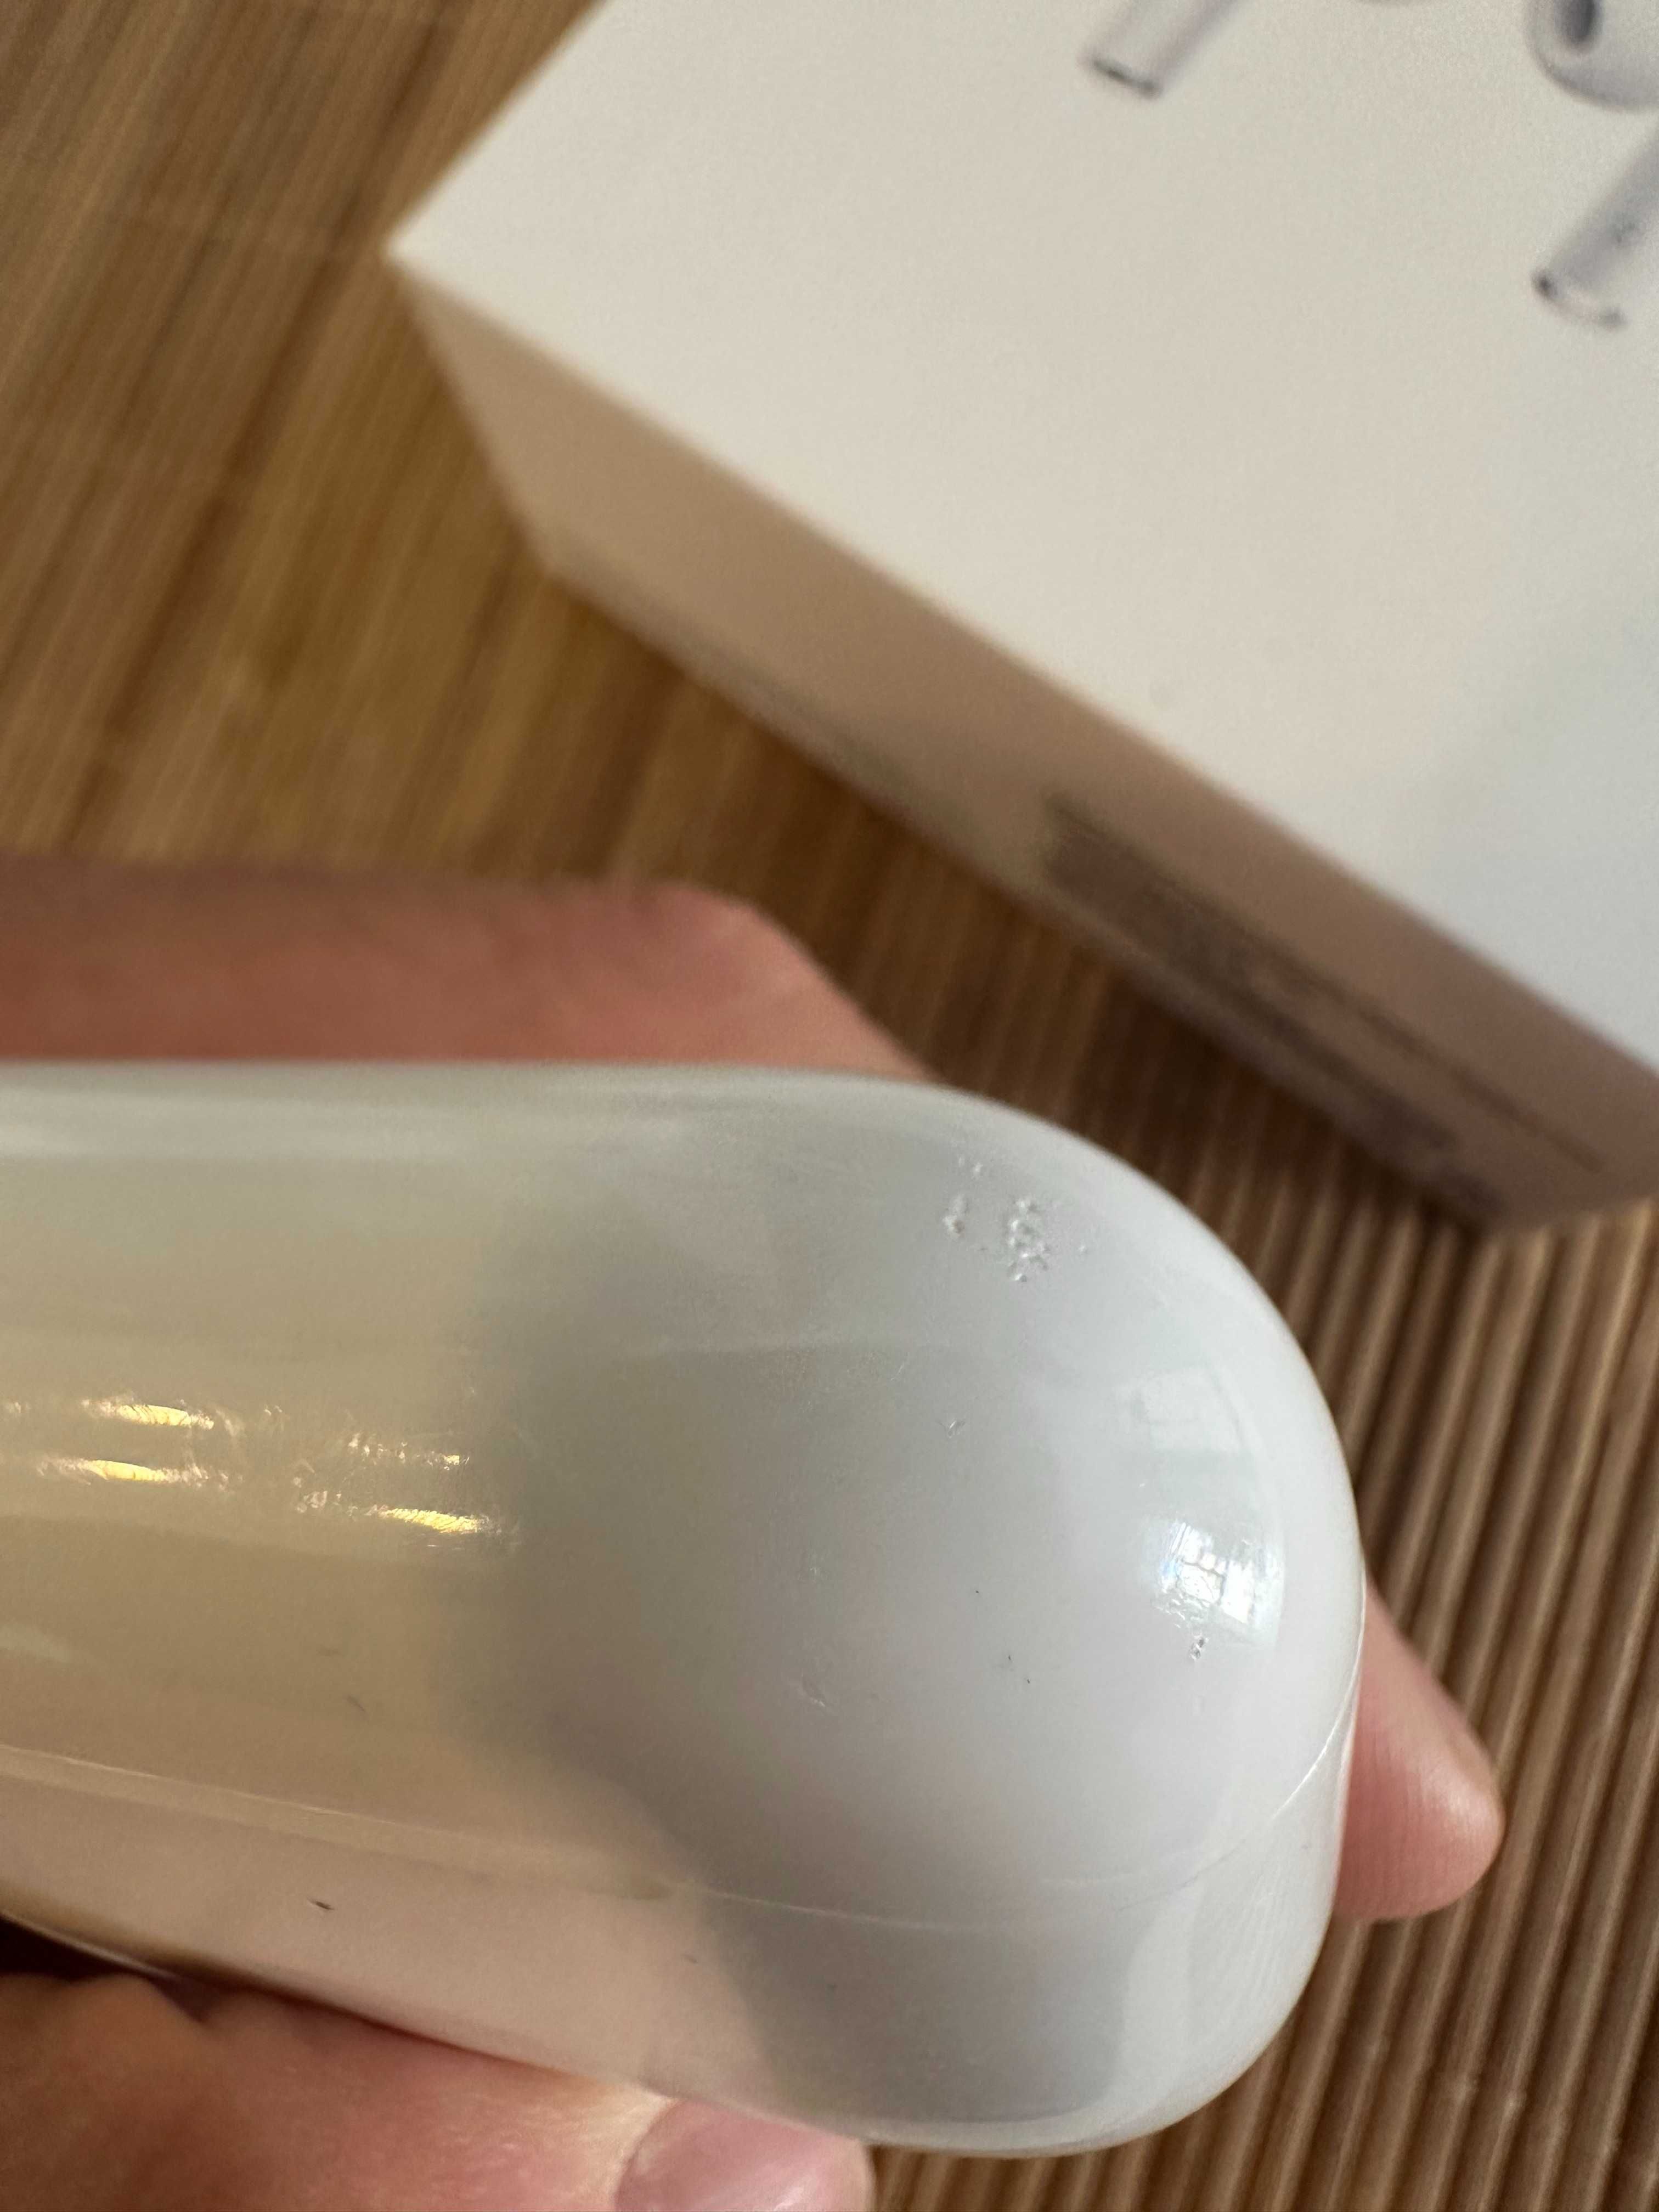 First Generation AirPods Pro